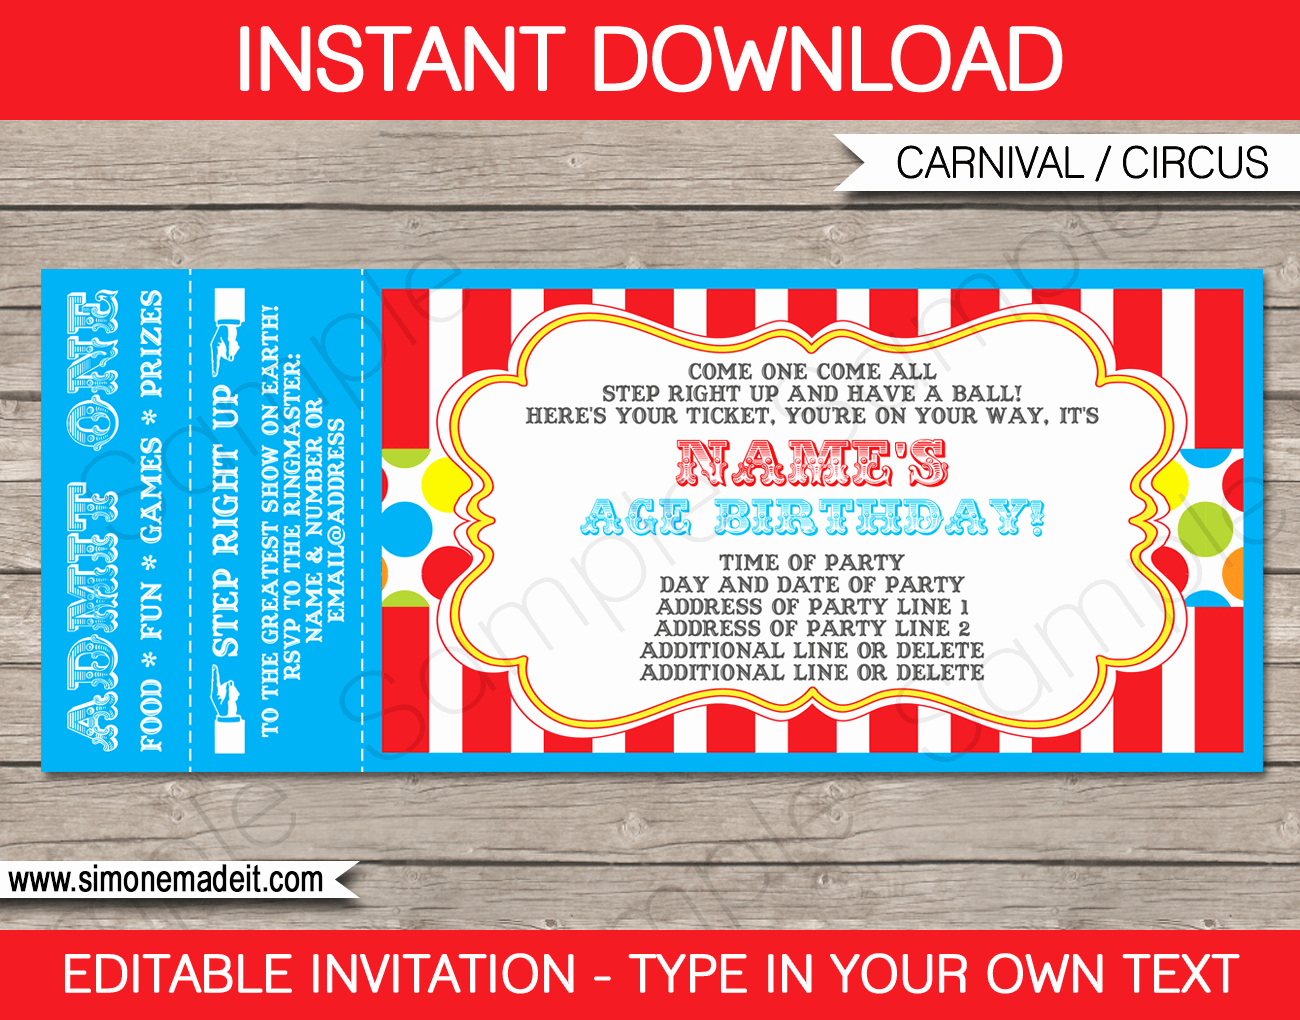 Carnival Ticket Template Awesome Carnival Party Ticket Invitation Template